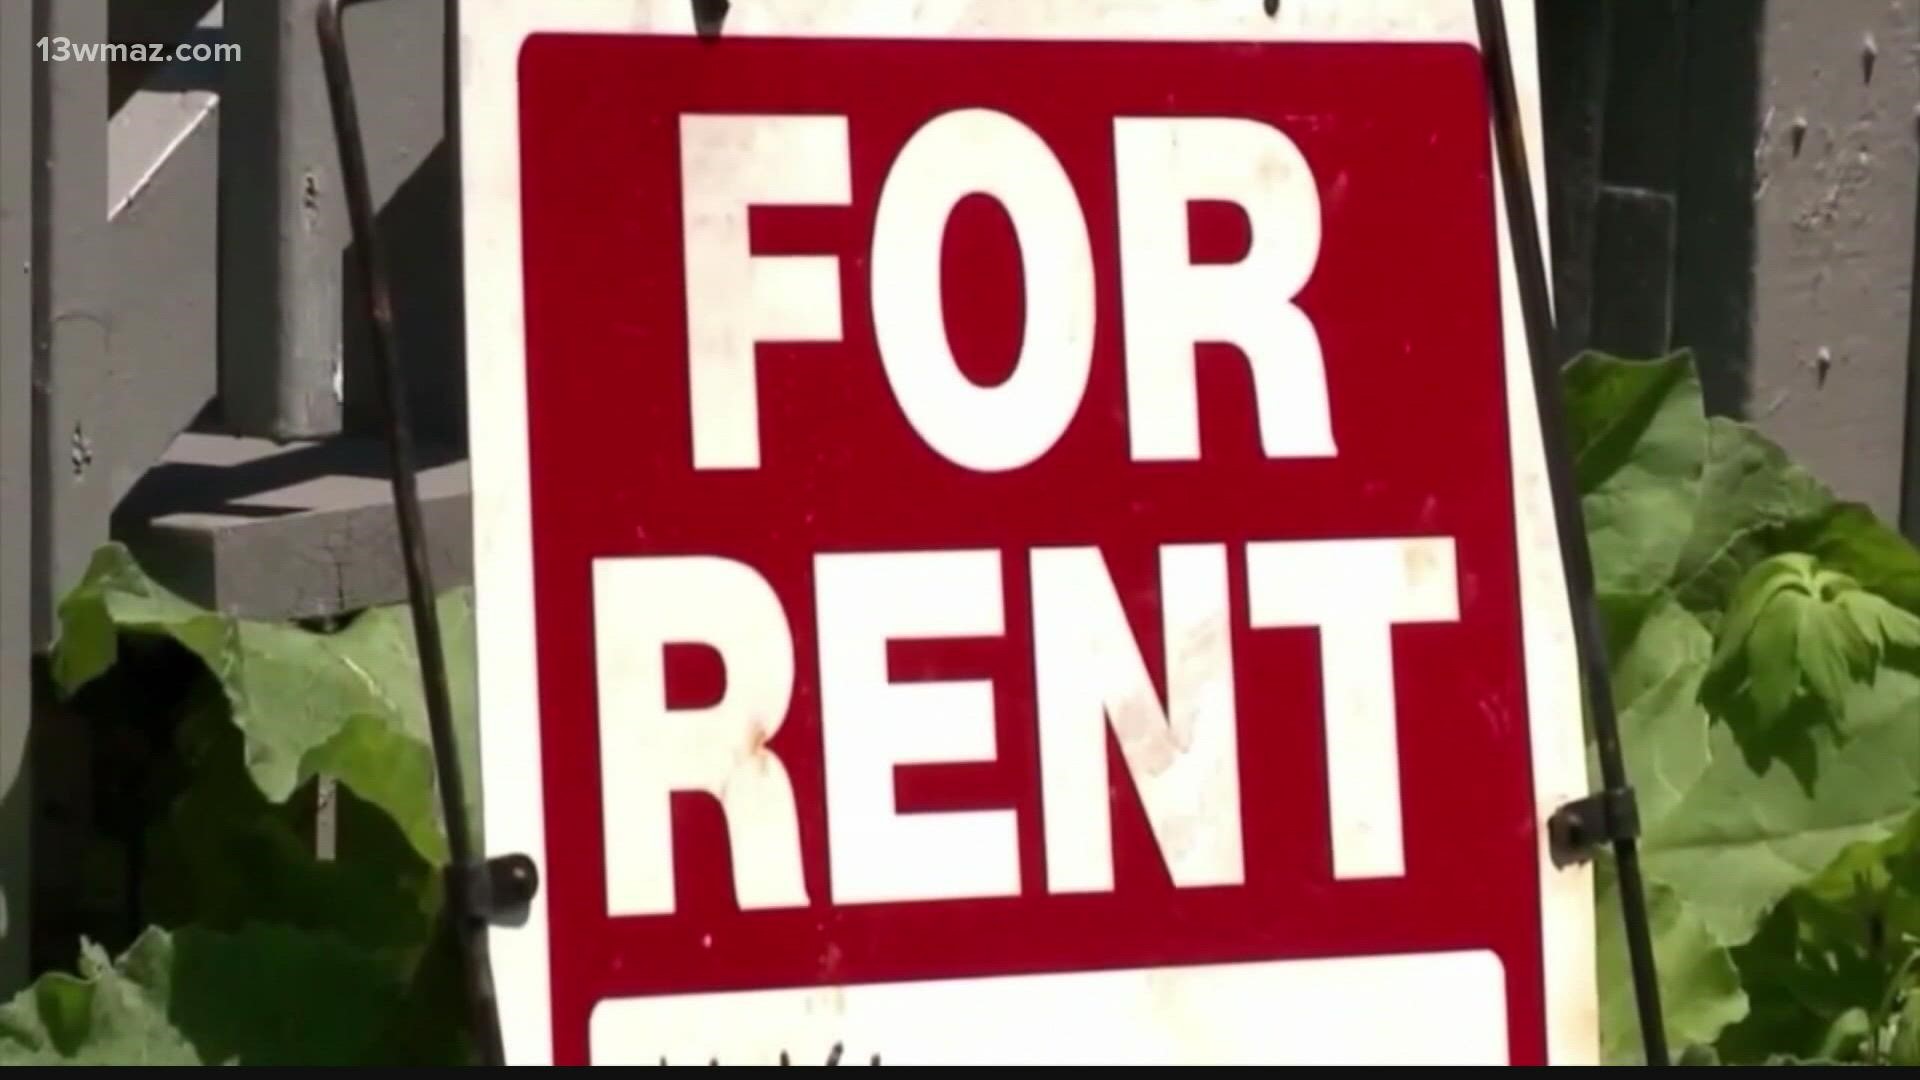 The Houston County Sheriff's Office this week warned people about housing scams targeting renters.